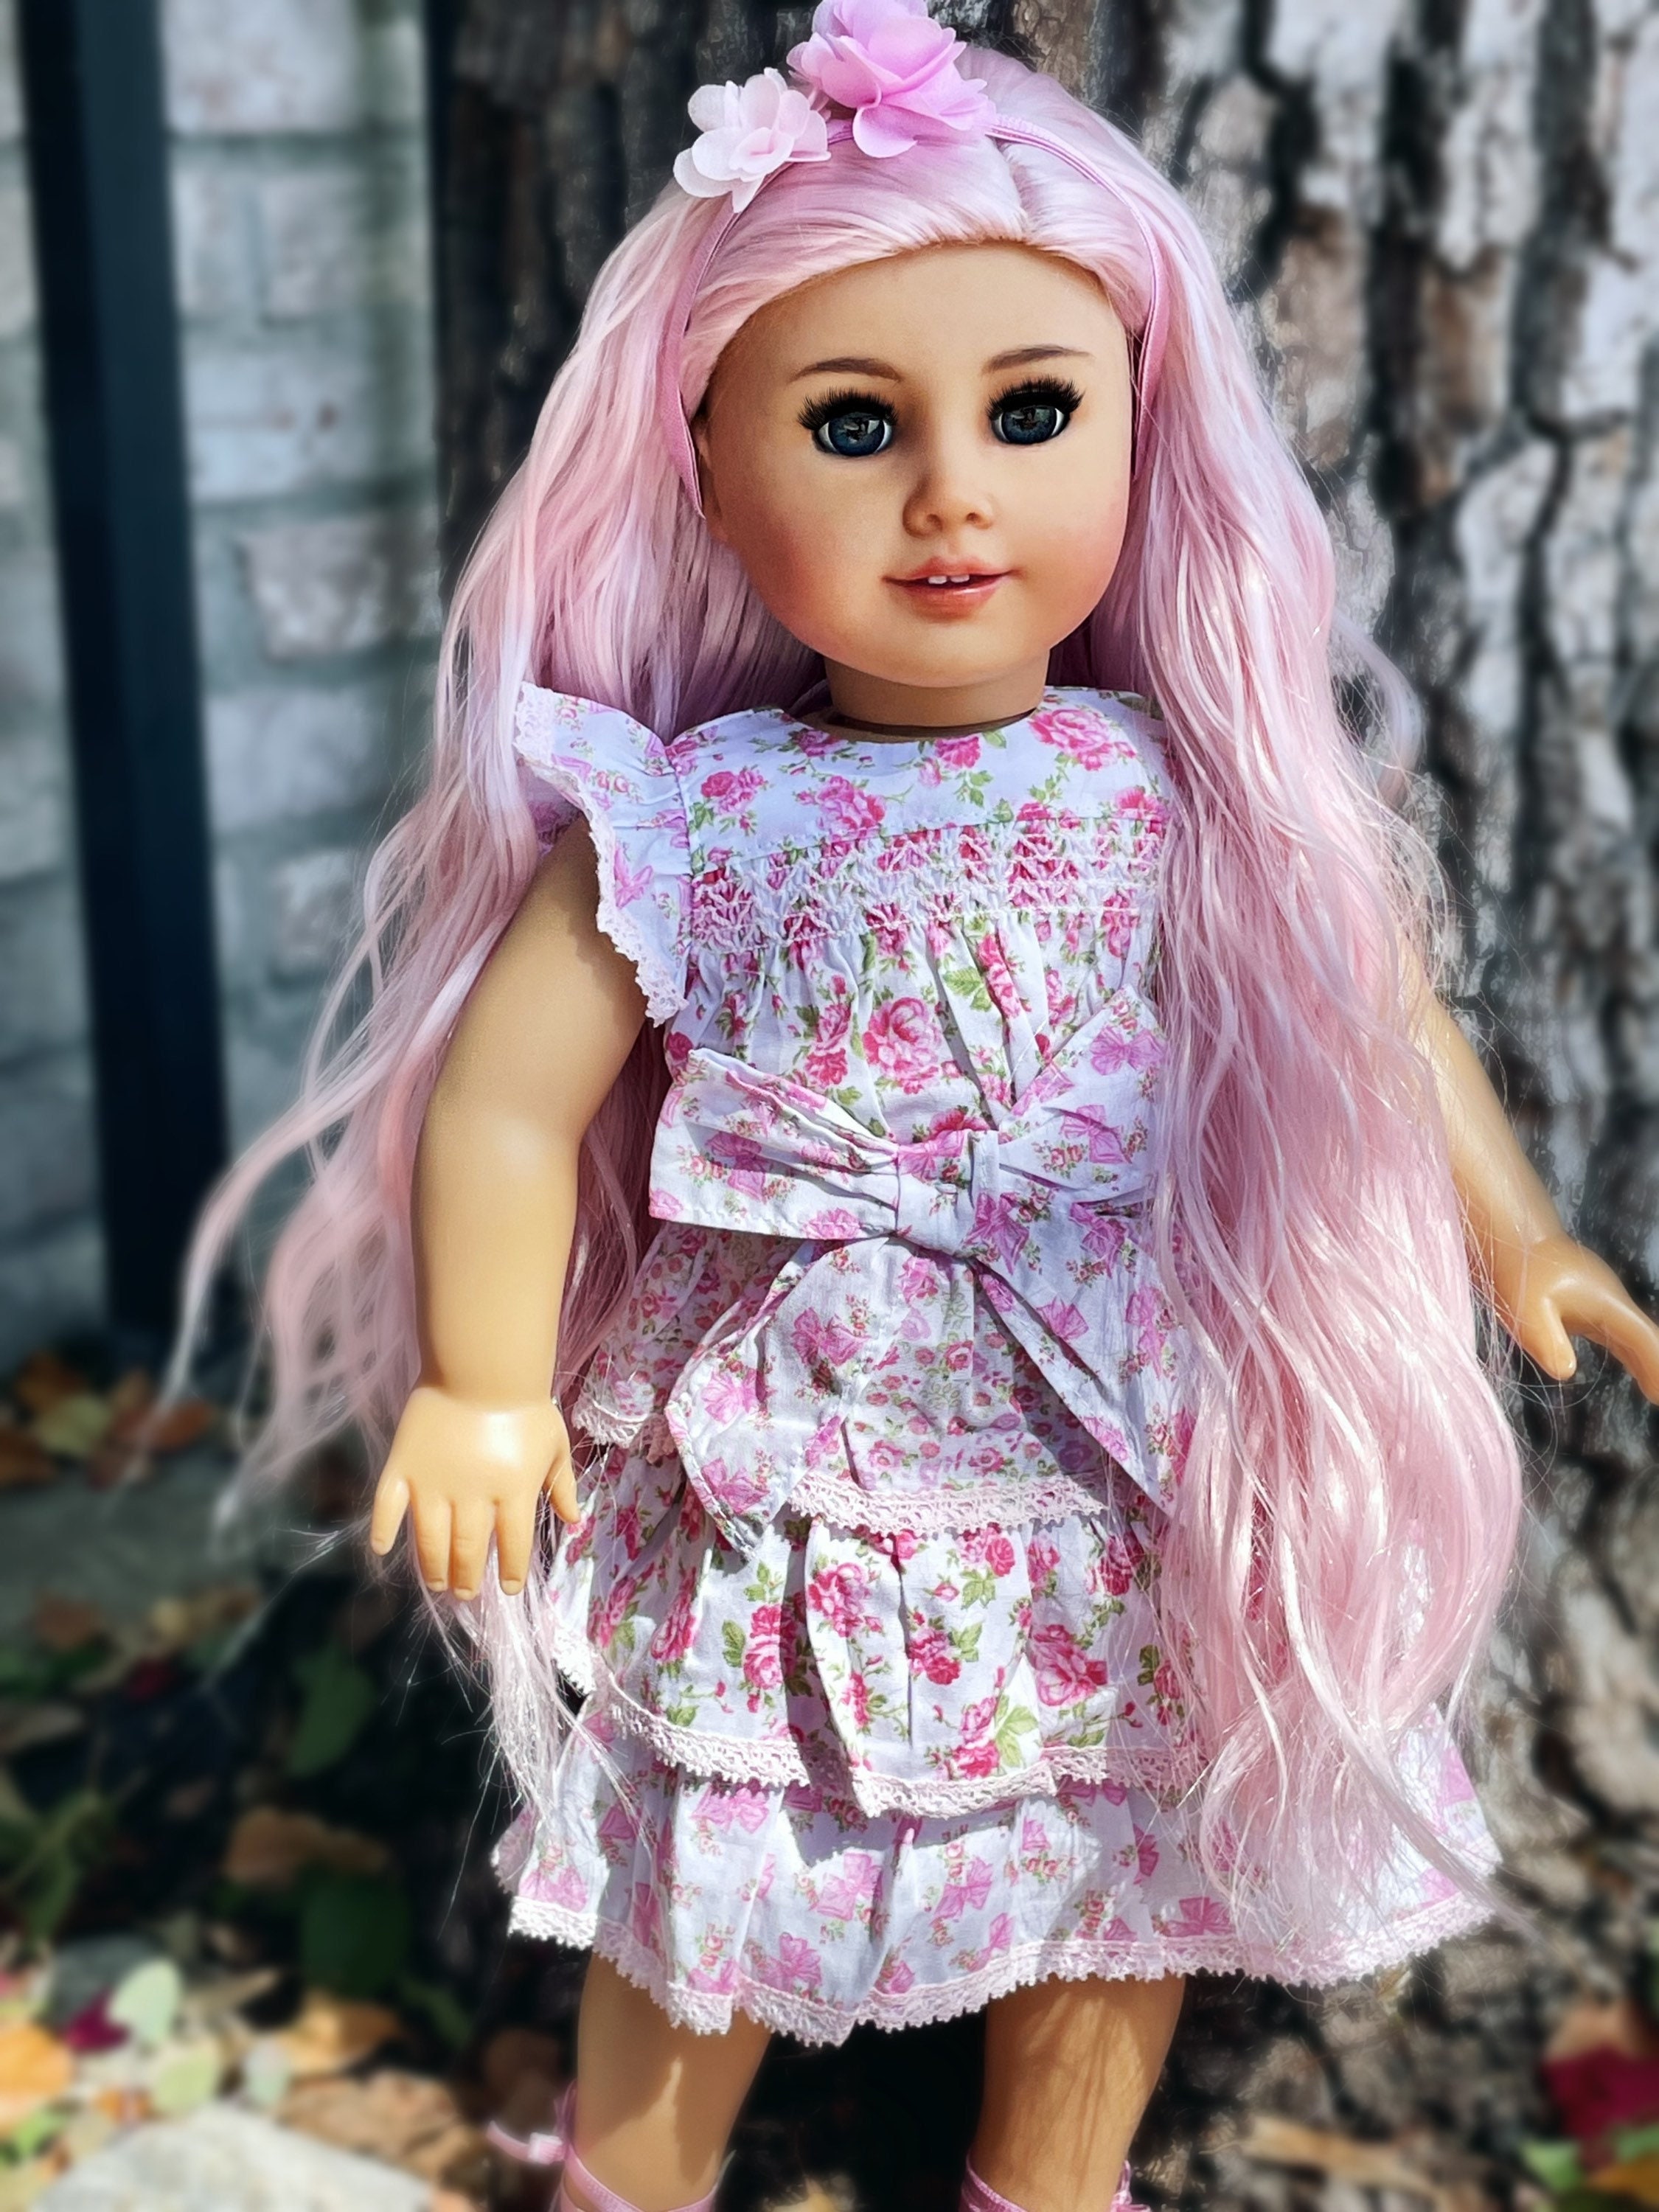  Lllunimon SD BJD Doll Hair Wigs, Pink Short Curly Doll Wig Heat  Resistant Fiber Synthetic Wig Doll Accessories,for 1/3 BJD Doll : Arts,  Crafts & Sewing